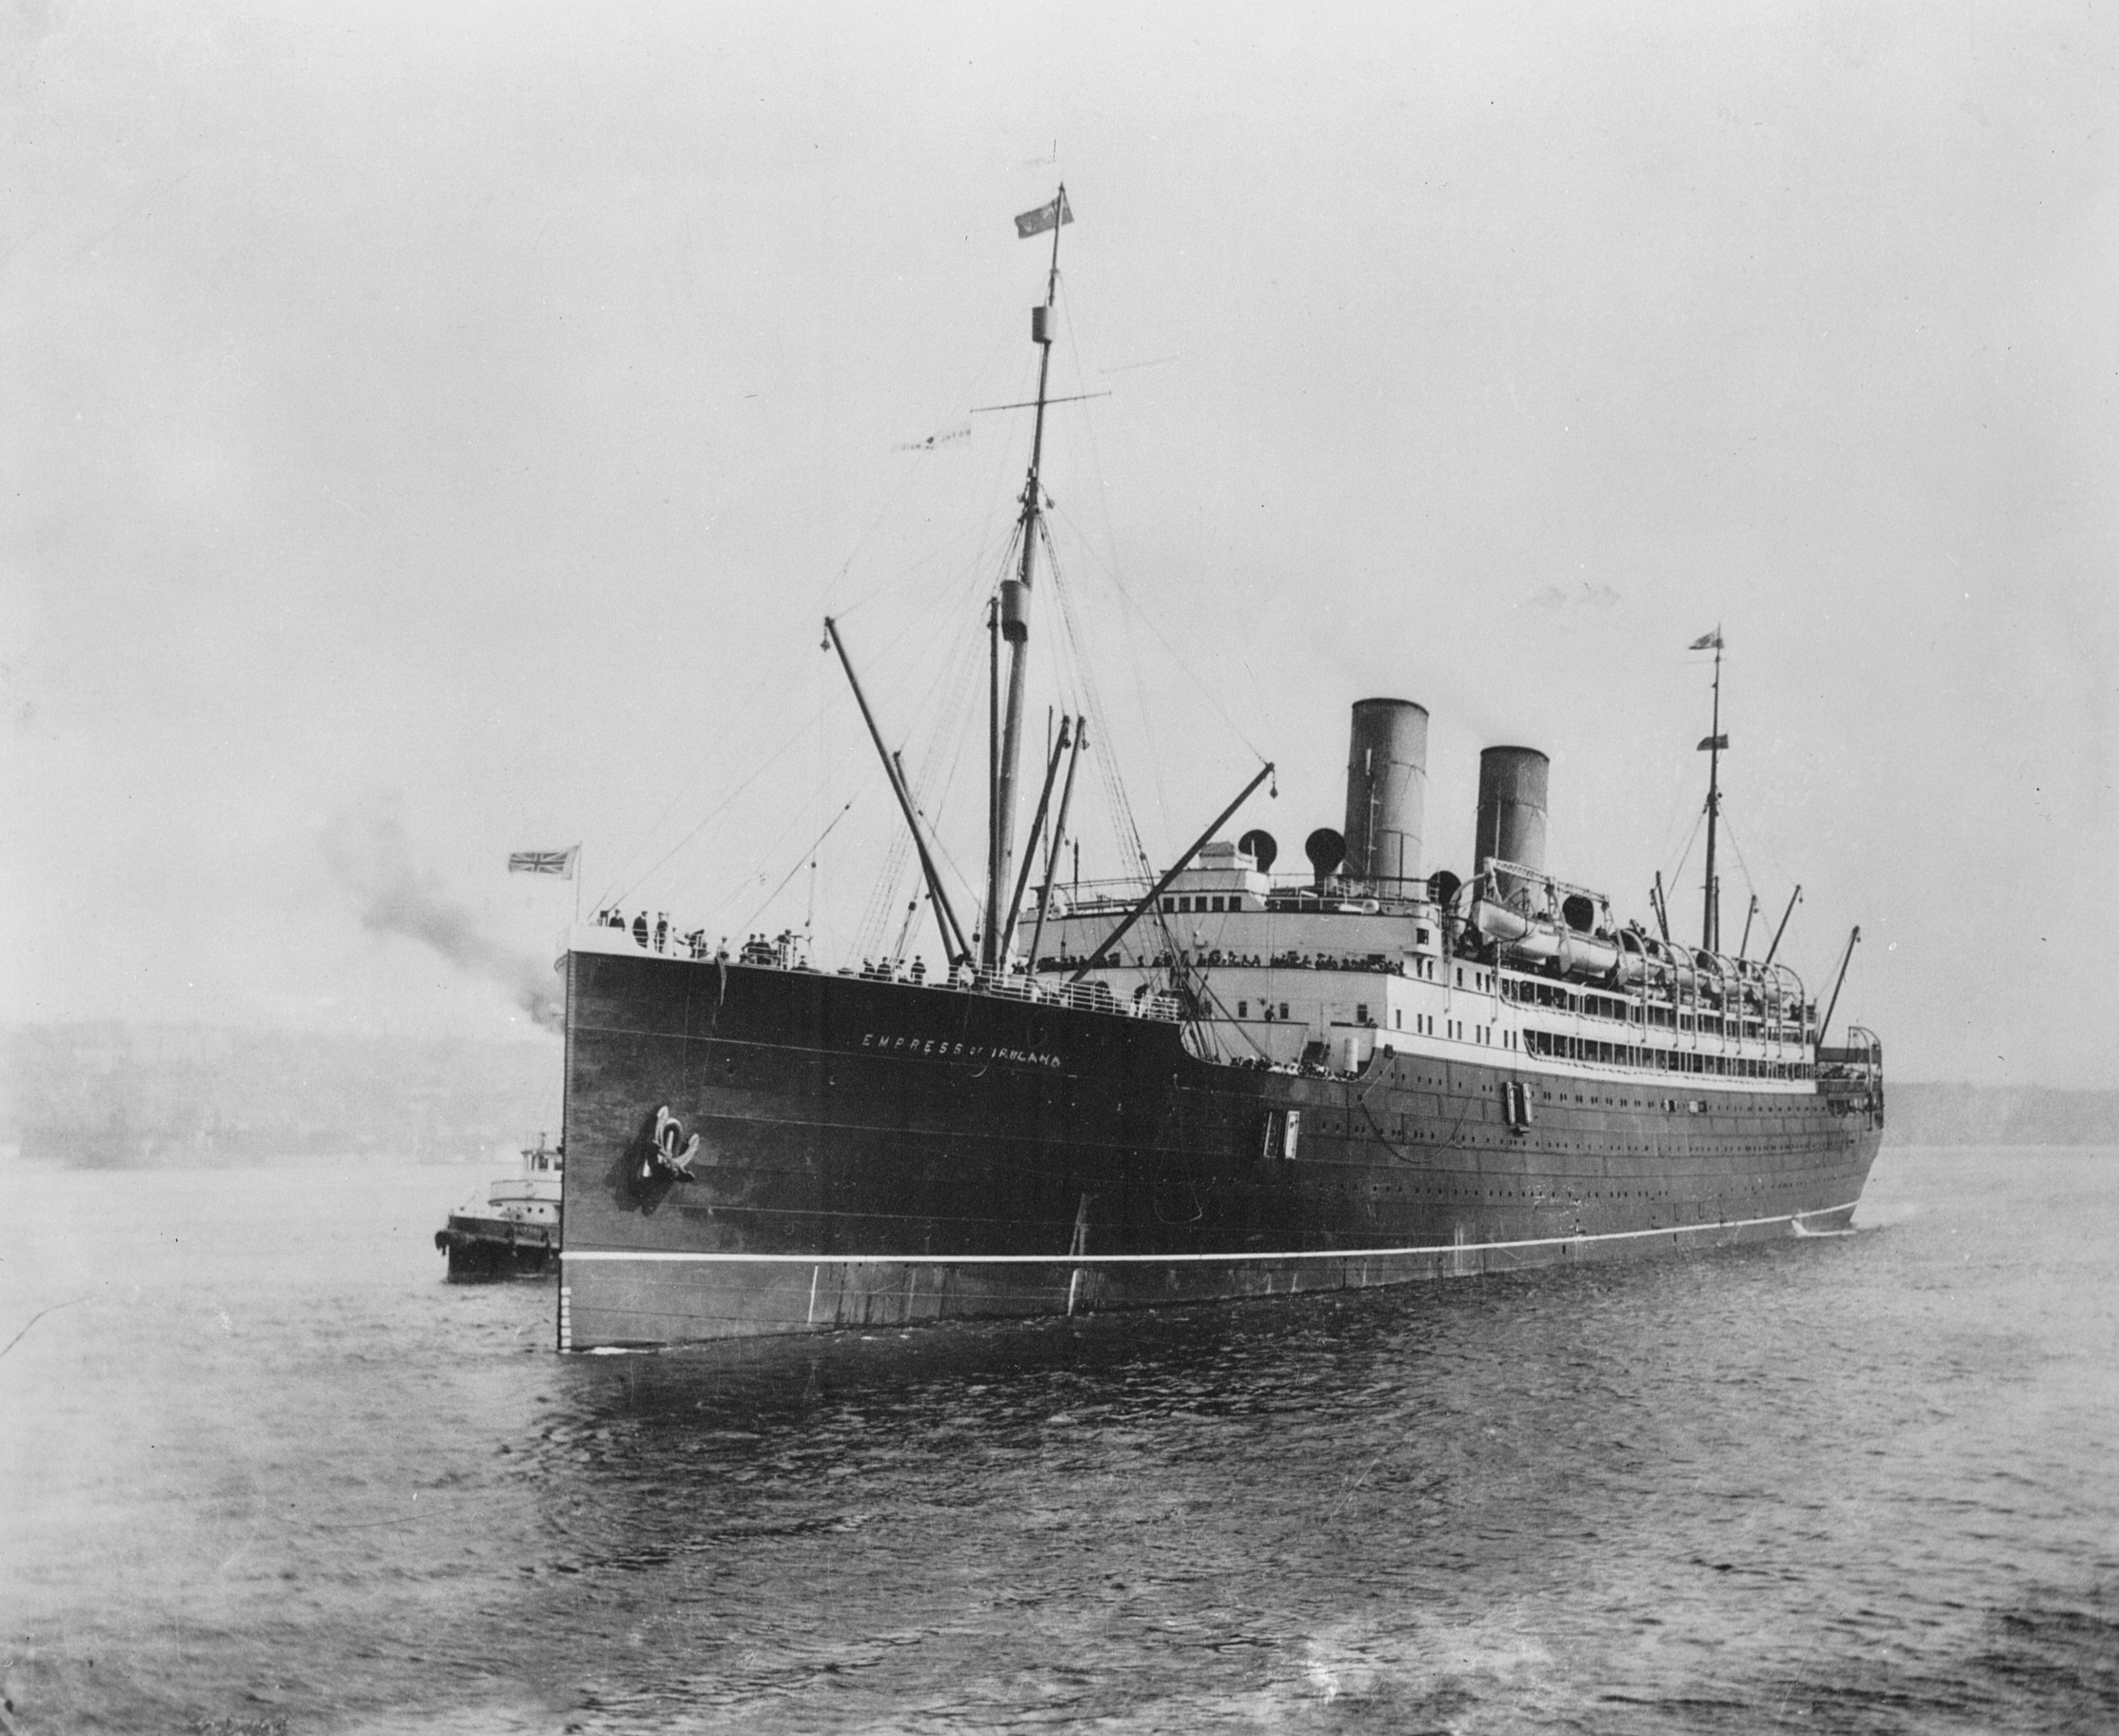 Olympic-class ocean liner - Wikipedia